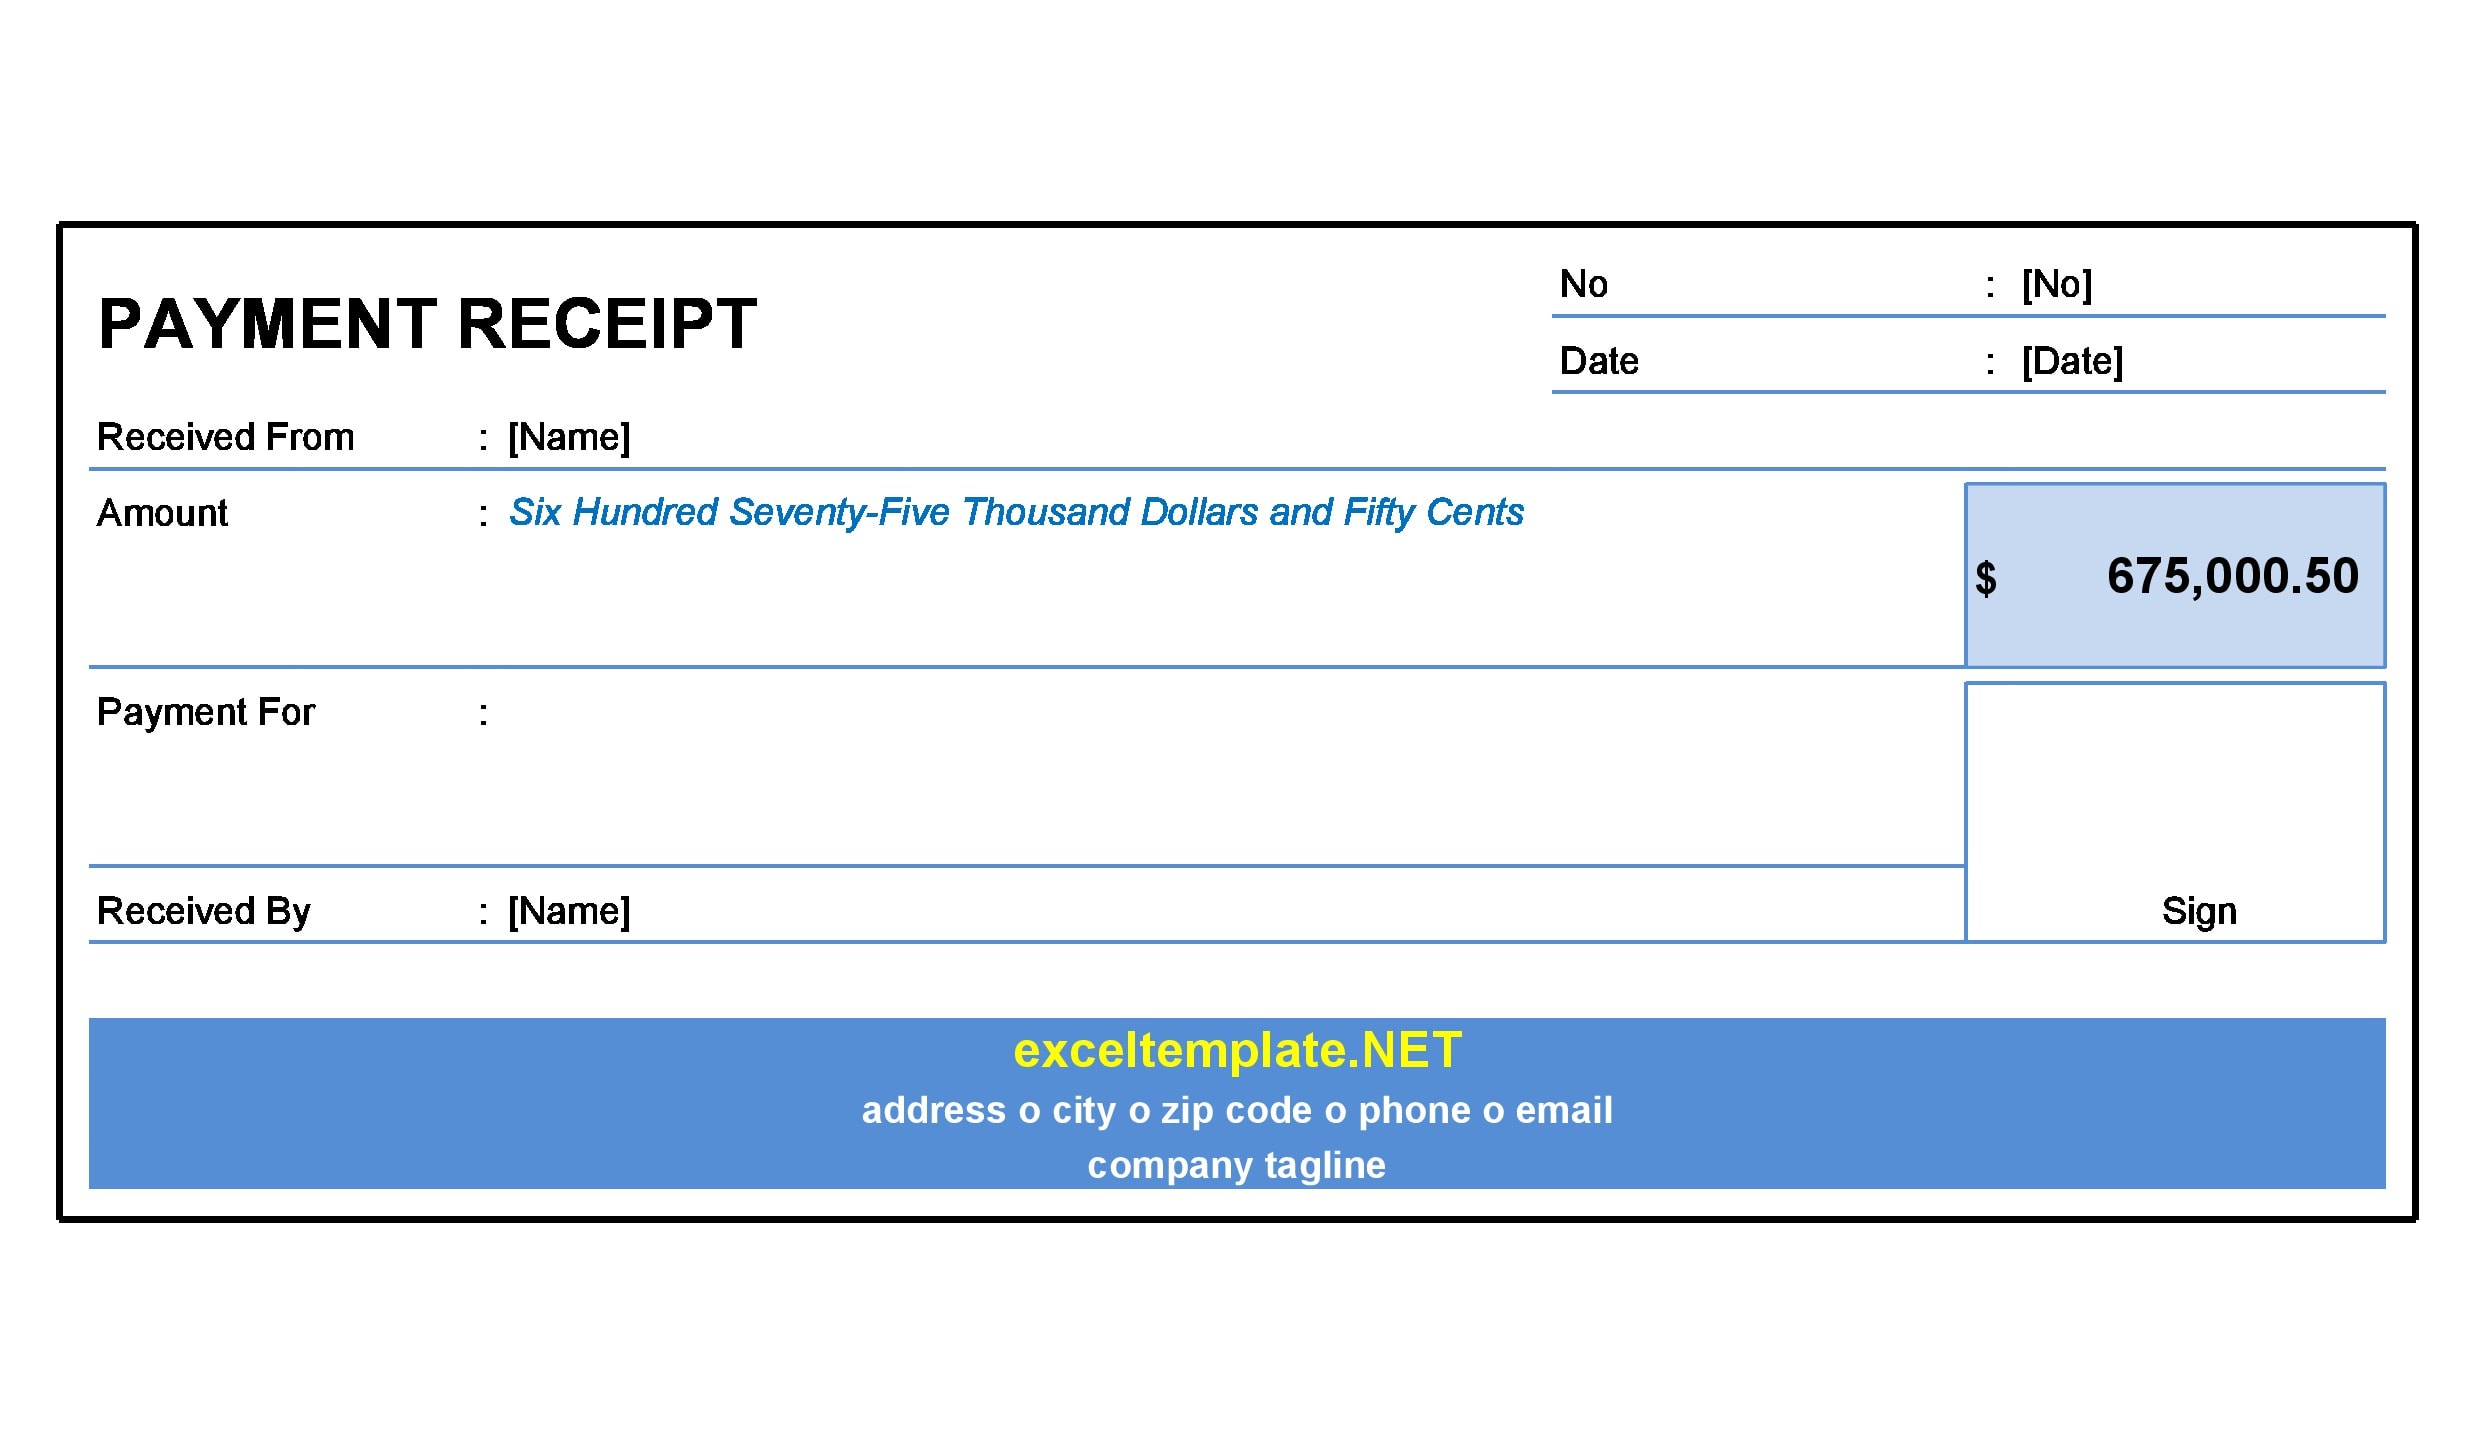 21 Great Payment Receipt Templates (Word) - TemplateArchive For Credit Card Receipt Template